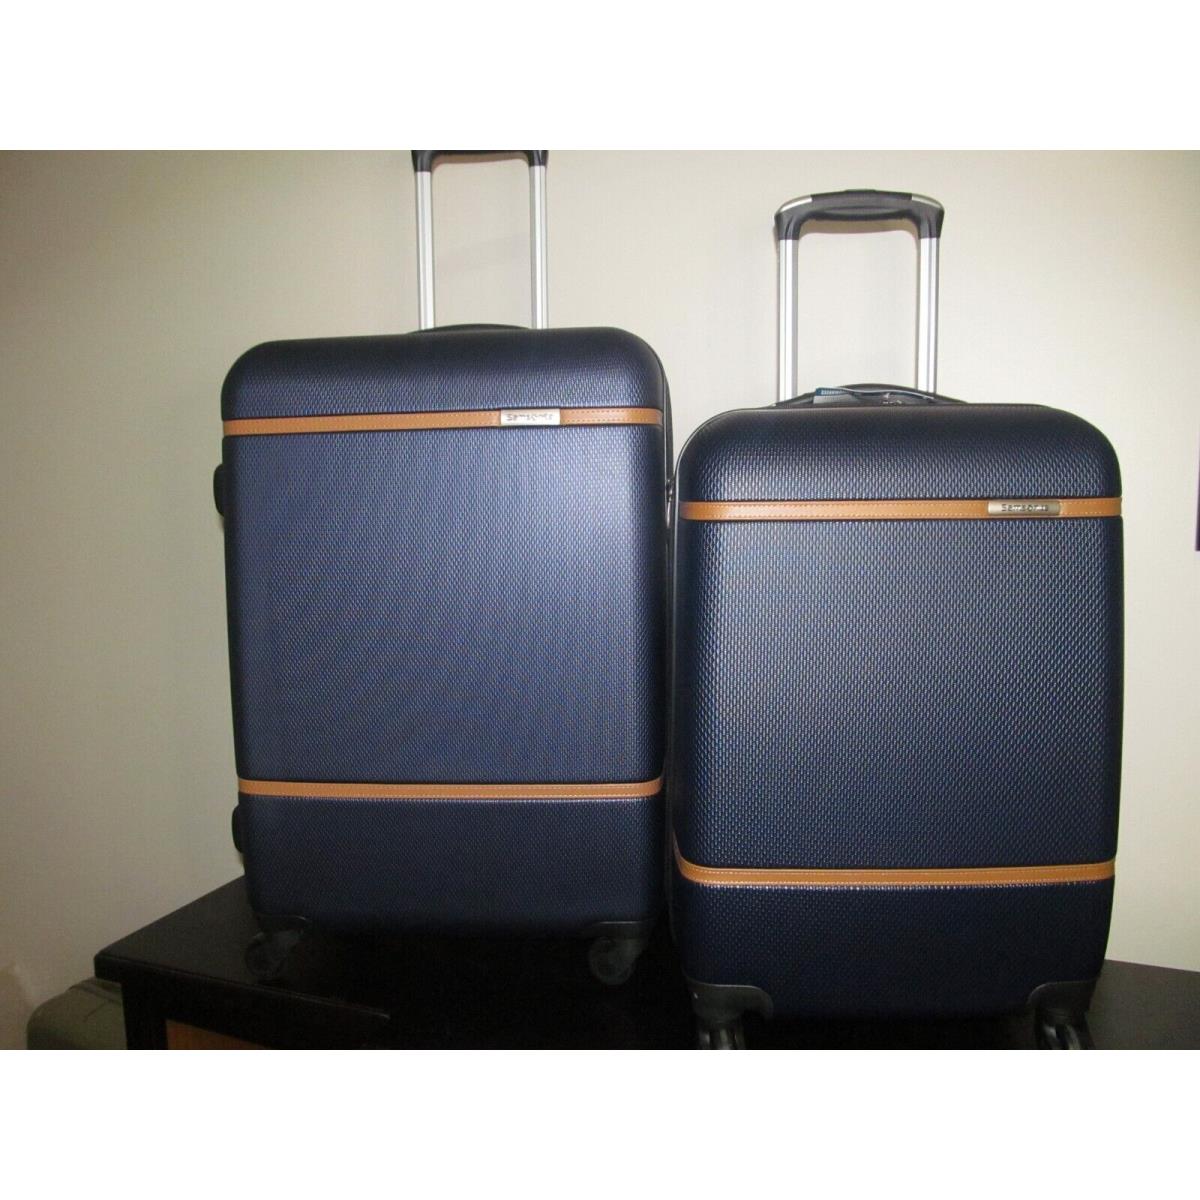 Samsonite Luggage Set-carry On Check In-navy Blue British Saddle Accents